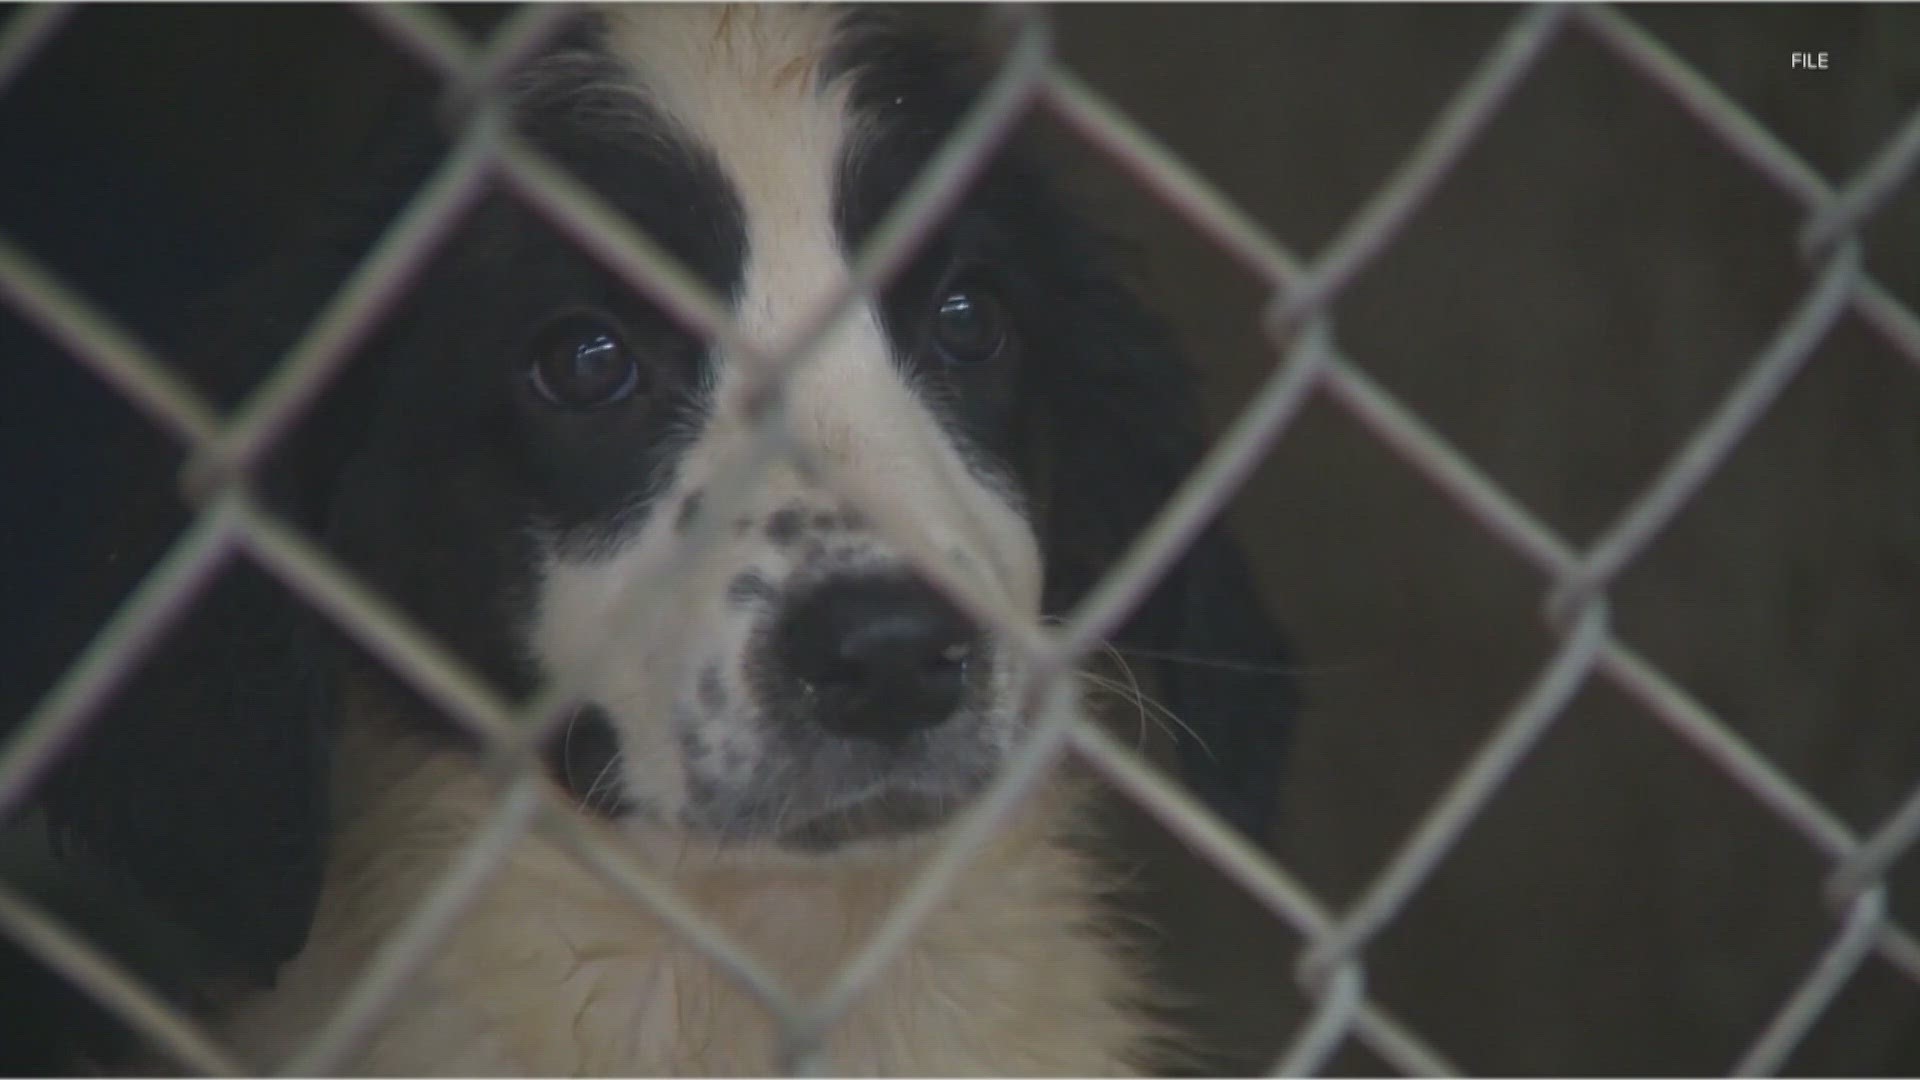 Multiple local animal shelters say they're seeing a spike in distemper cases among dogs.